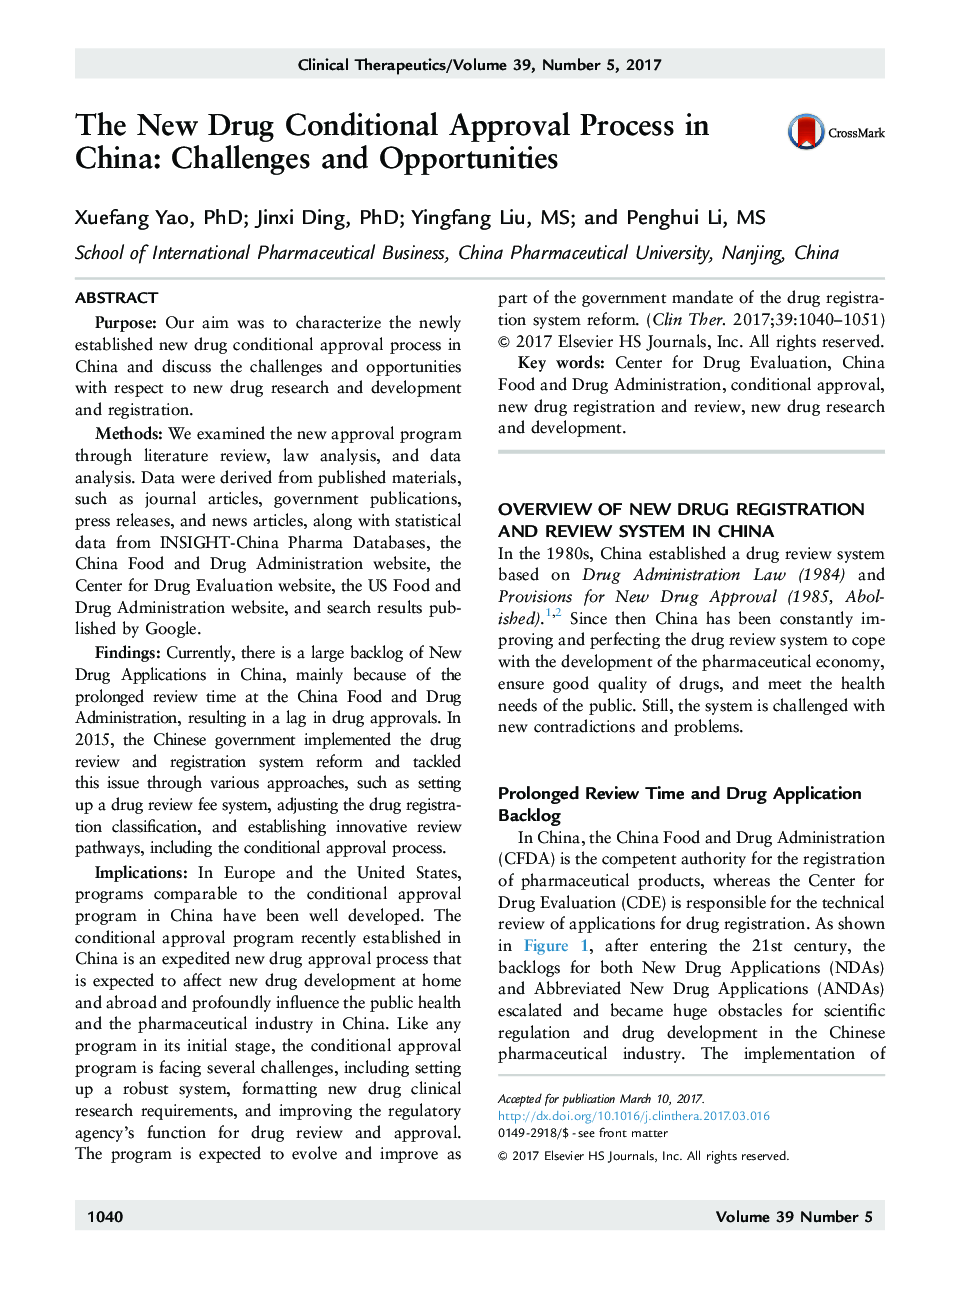 The New Drug Conditional Approval Process in China: Challenges and Opportunities